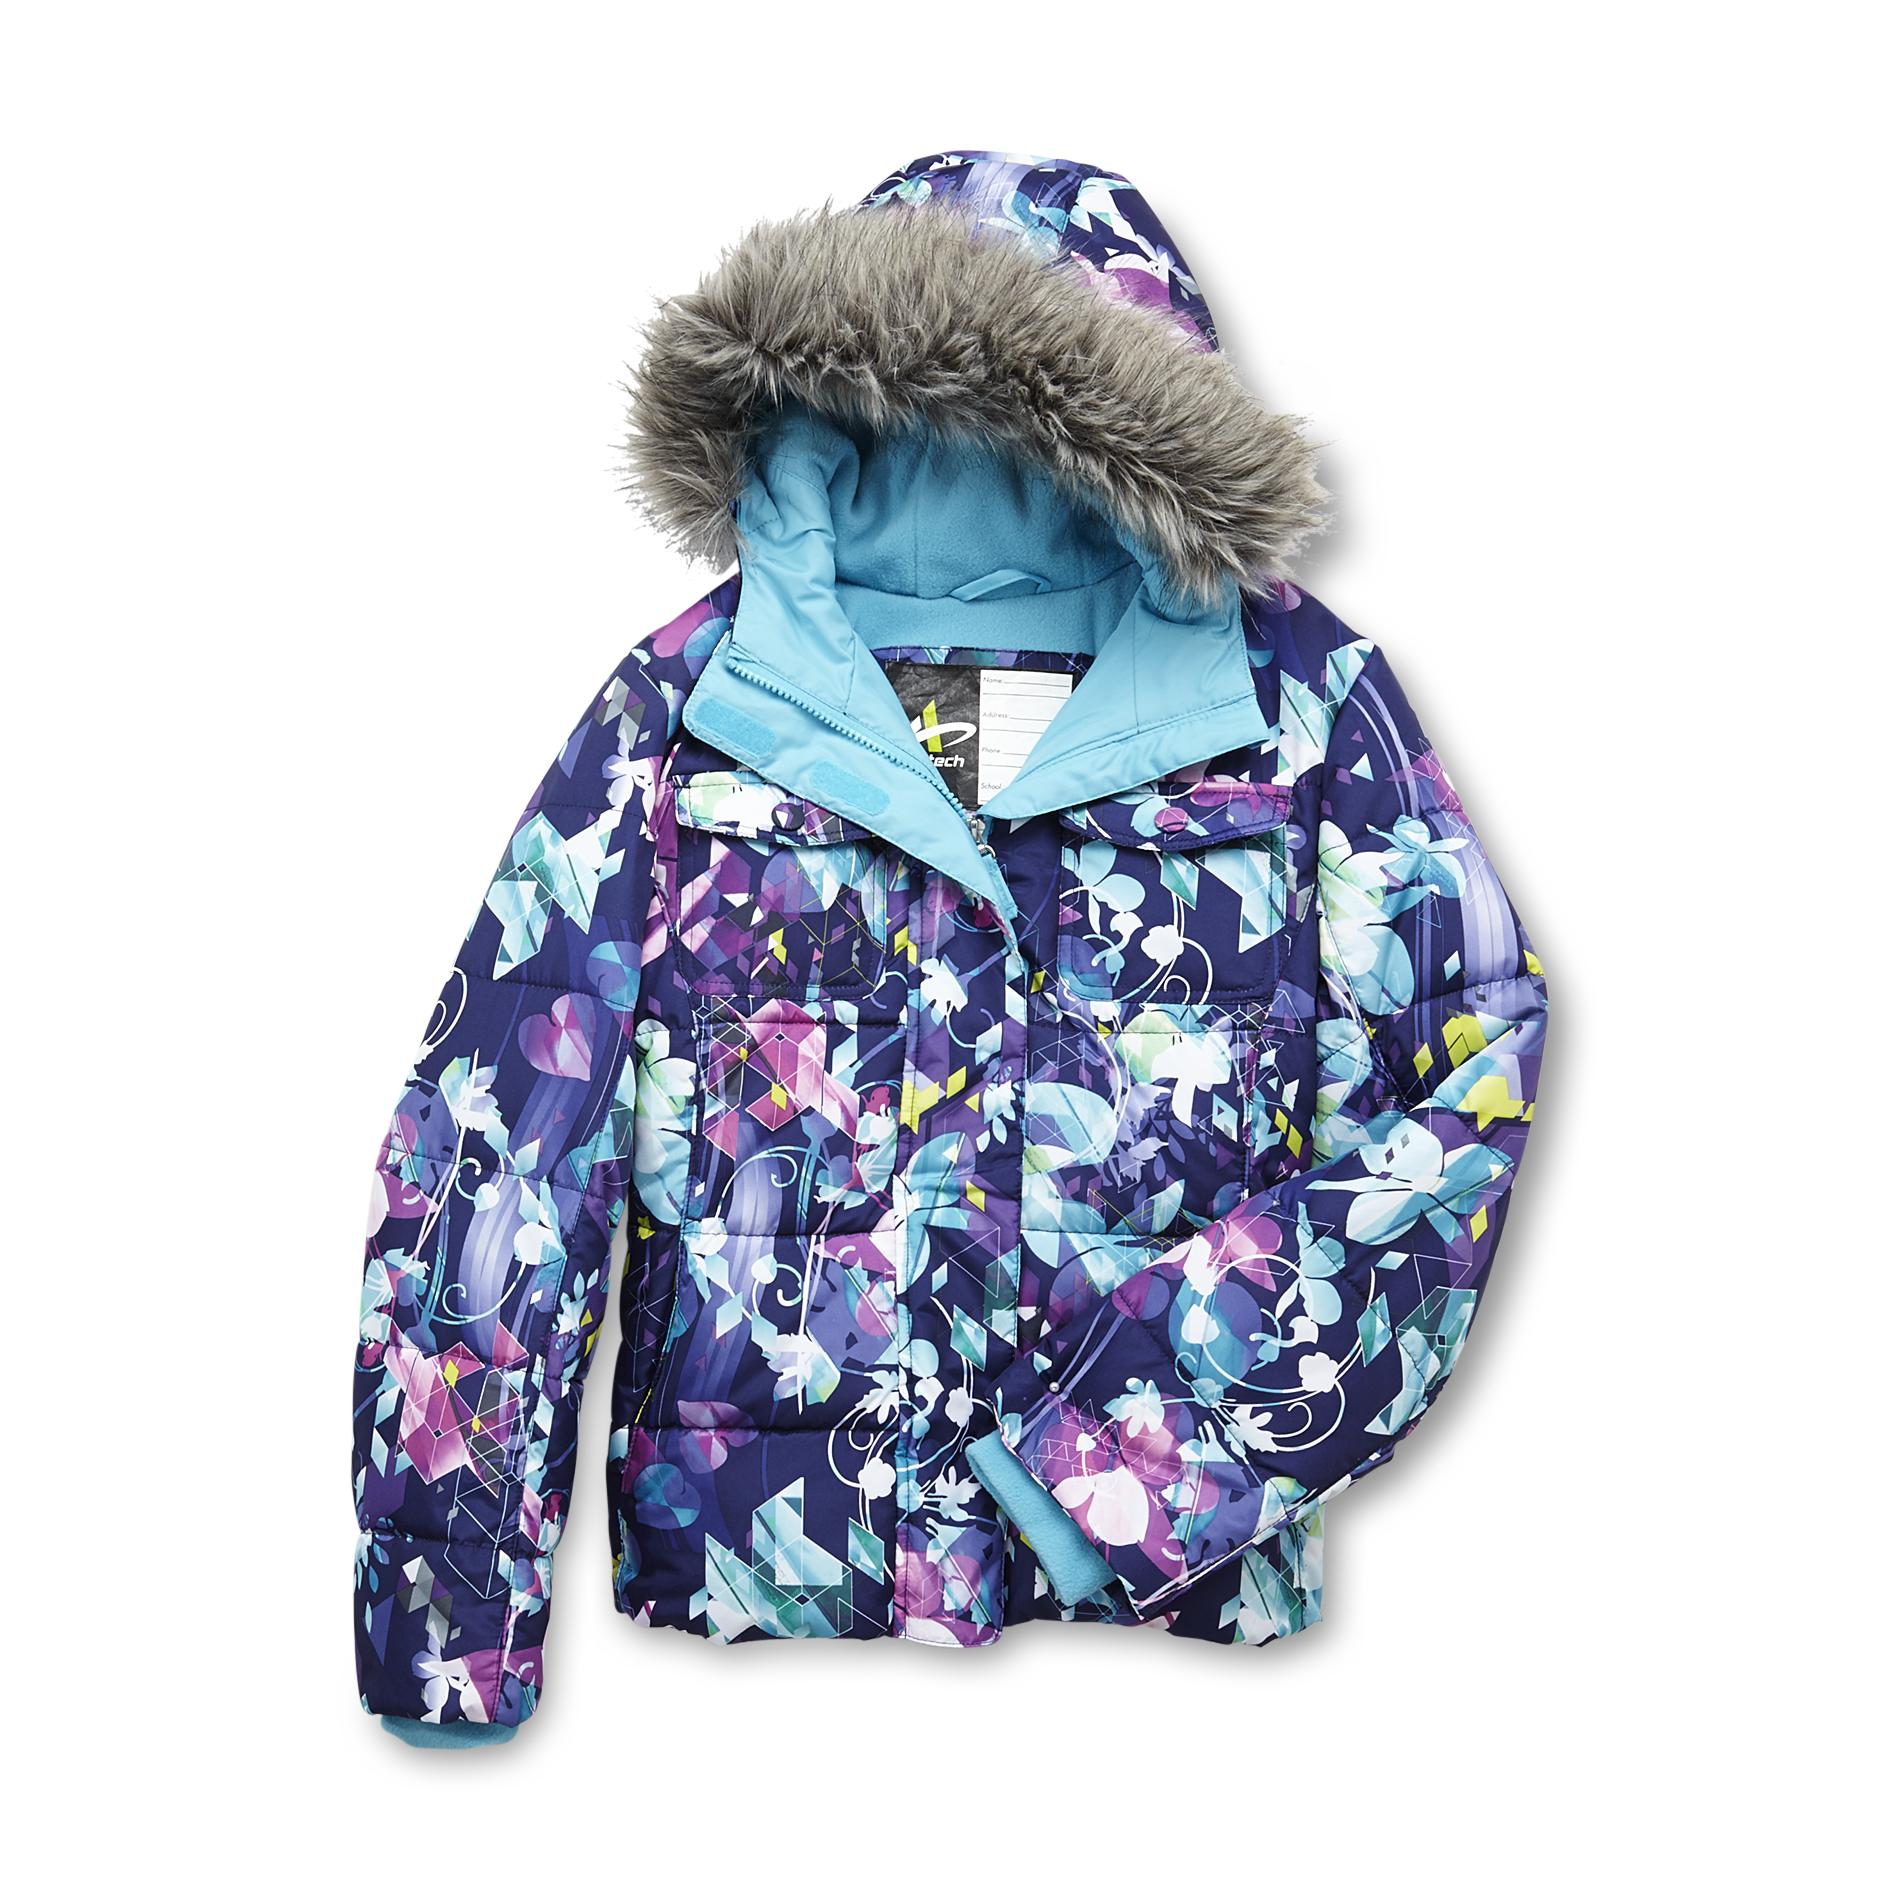 Athletech Girl's Hooded Performance Jacket - Geometric Floral